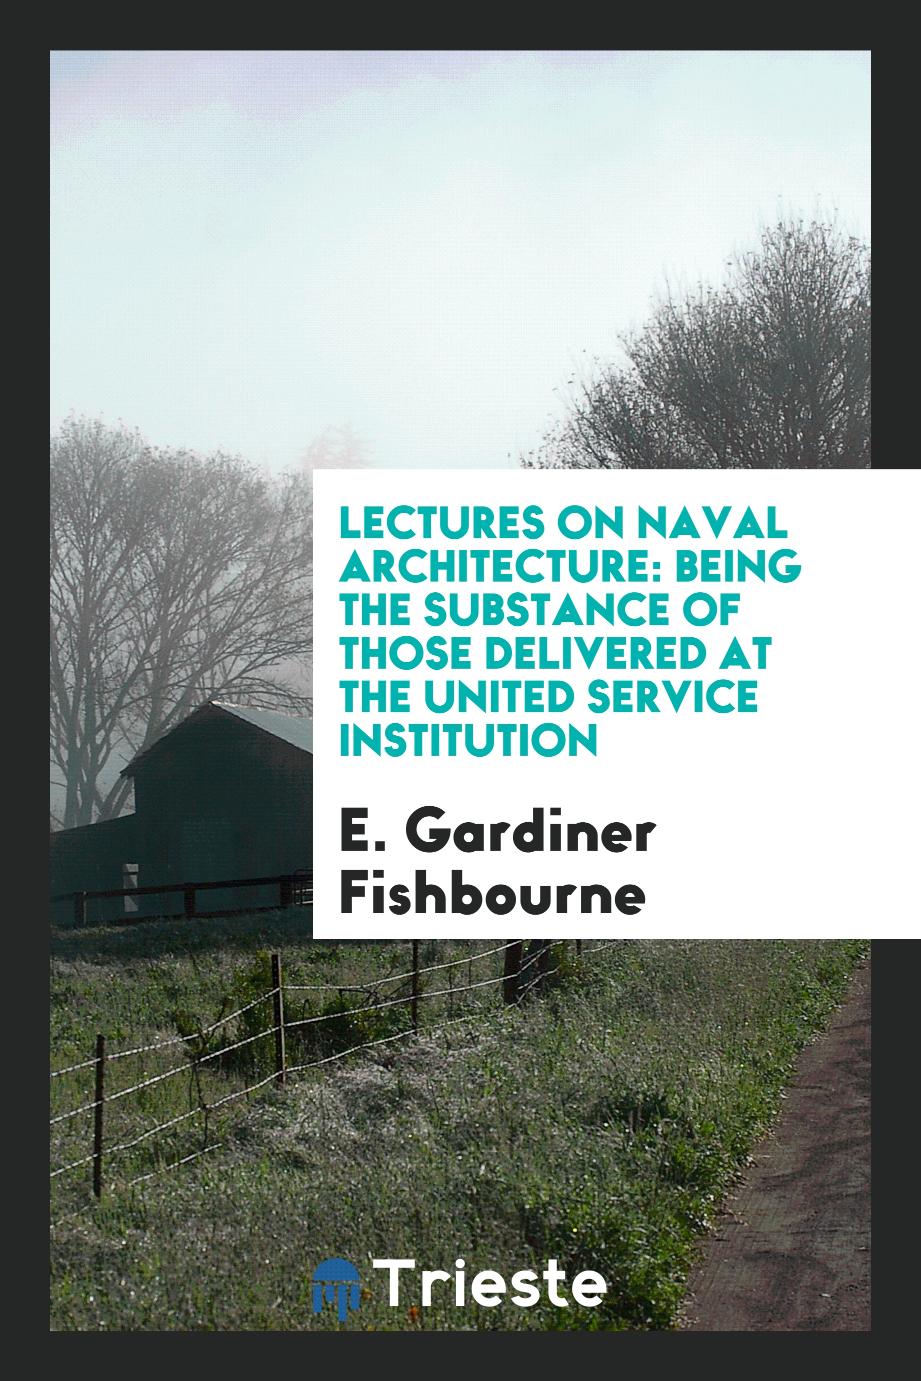 Lectures on Naval Architecture: Being the Substance of Those Delivered at the United Service Institution